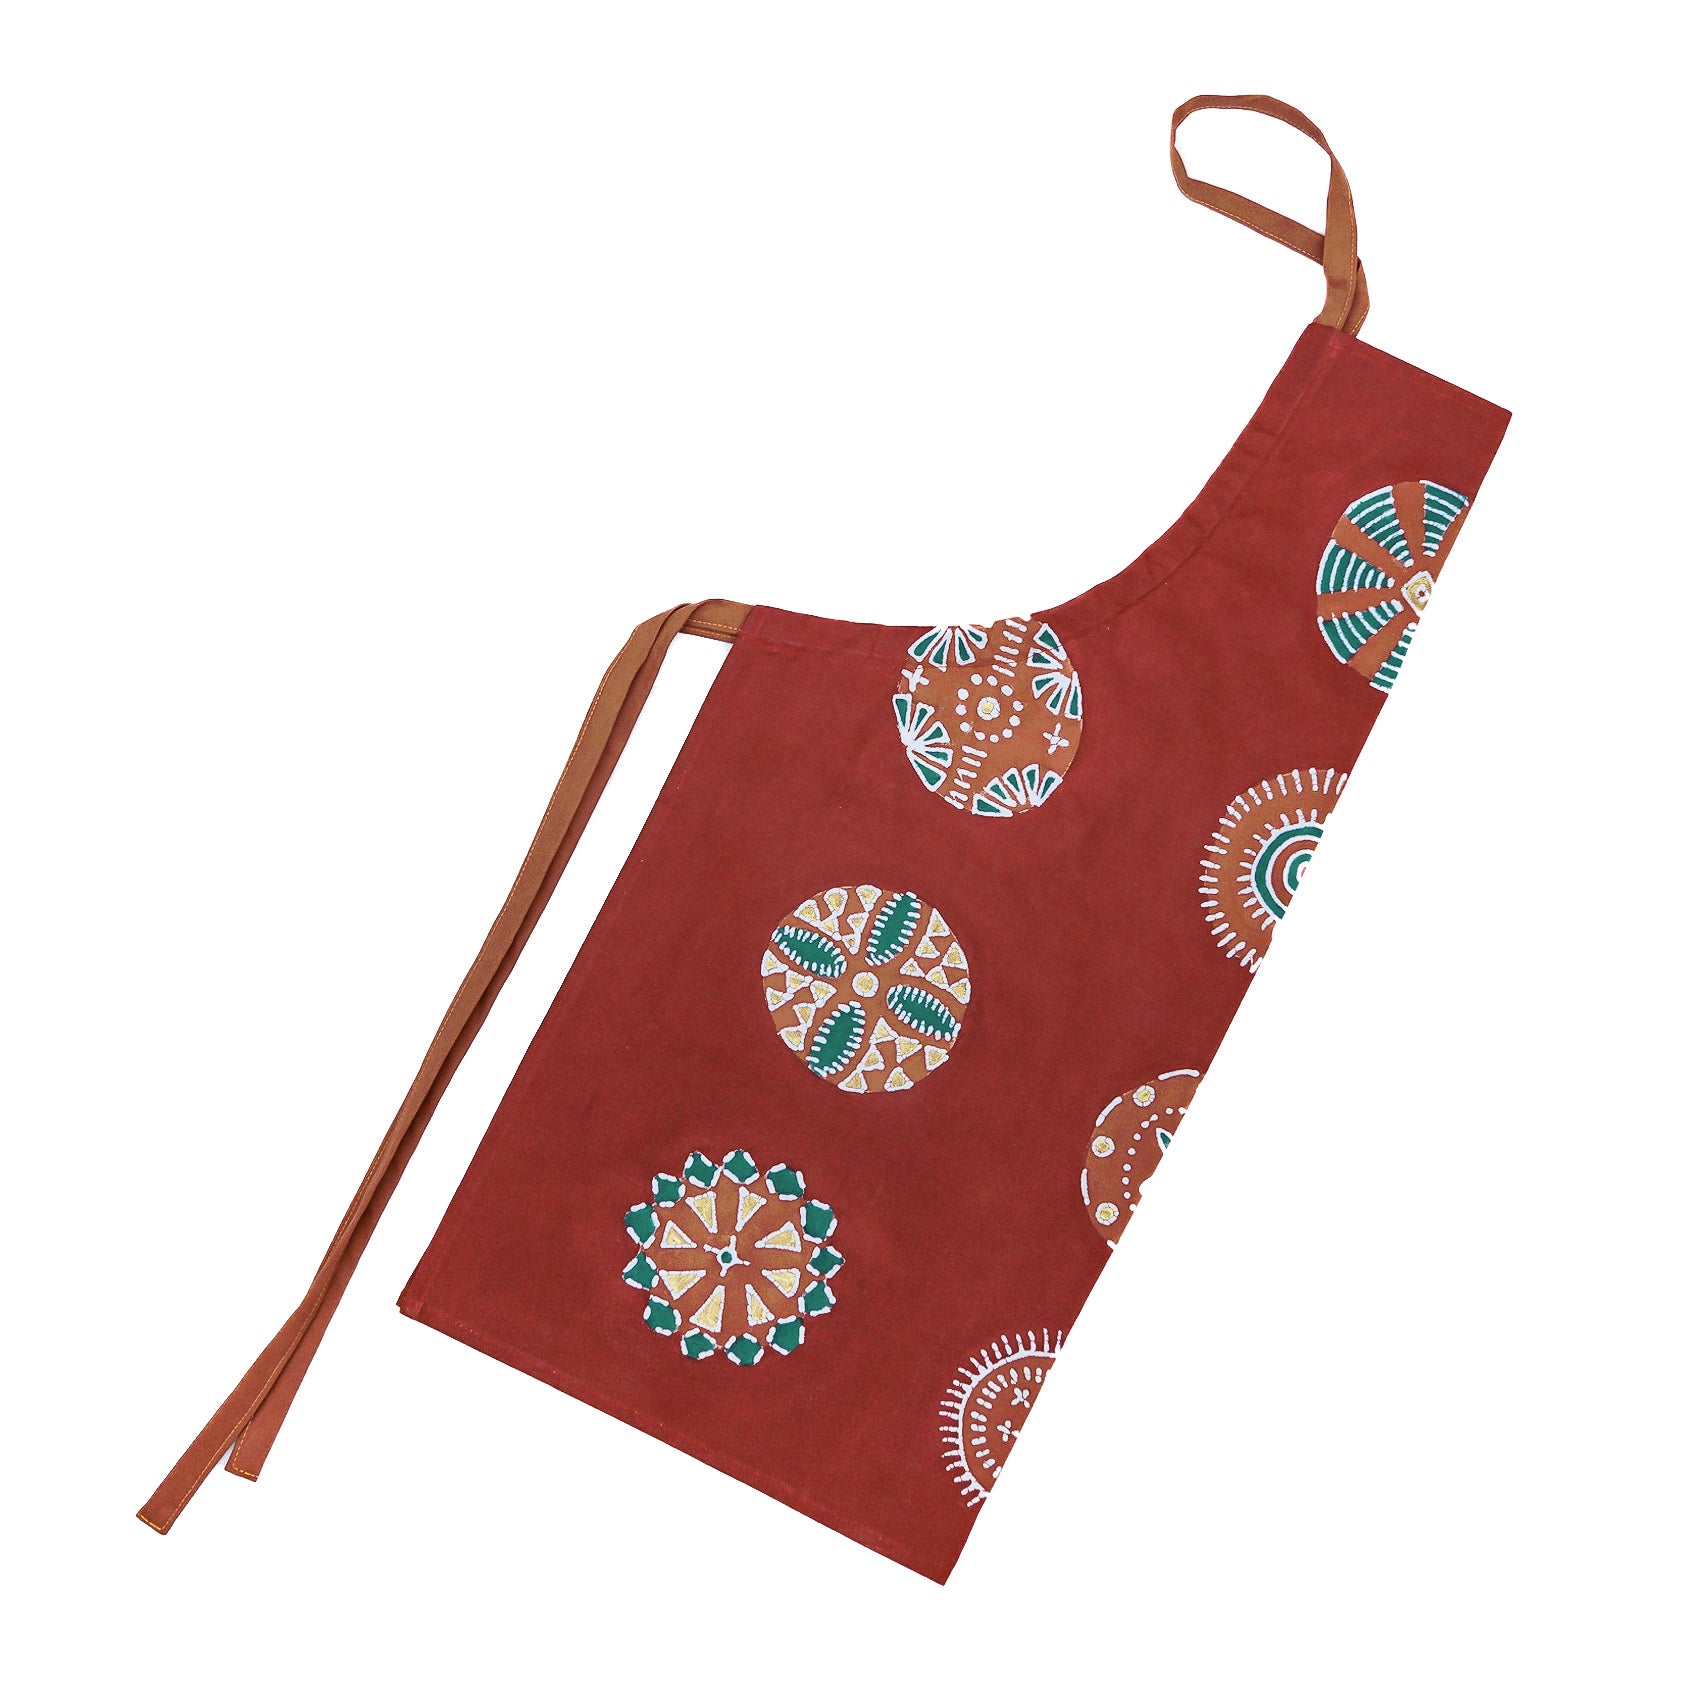 Kuosi Festive Aprons - Hand Painted by TRIBAL TEXTILES - Handcrafted Home Decor Interiors - African Made